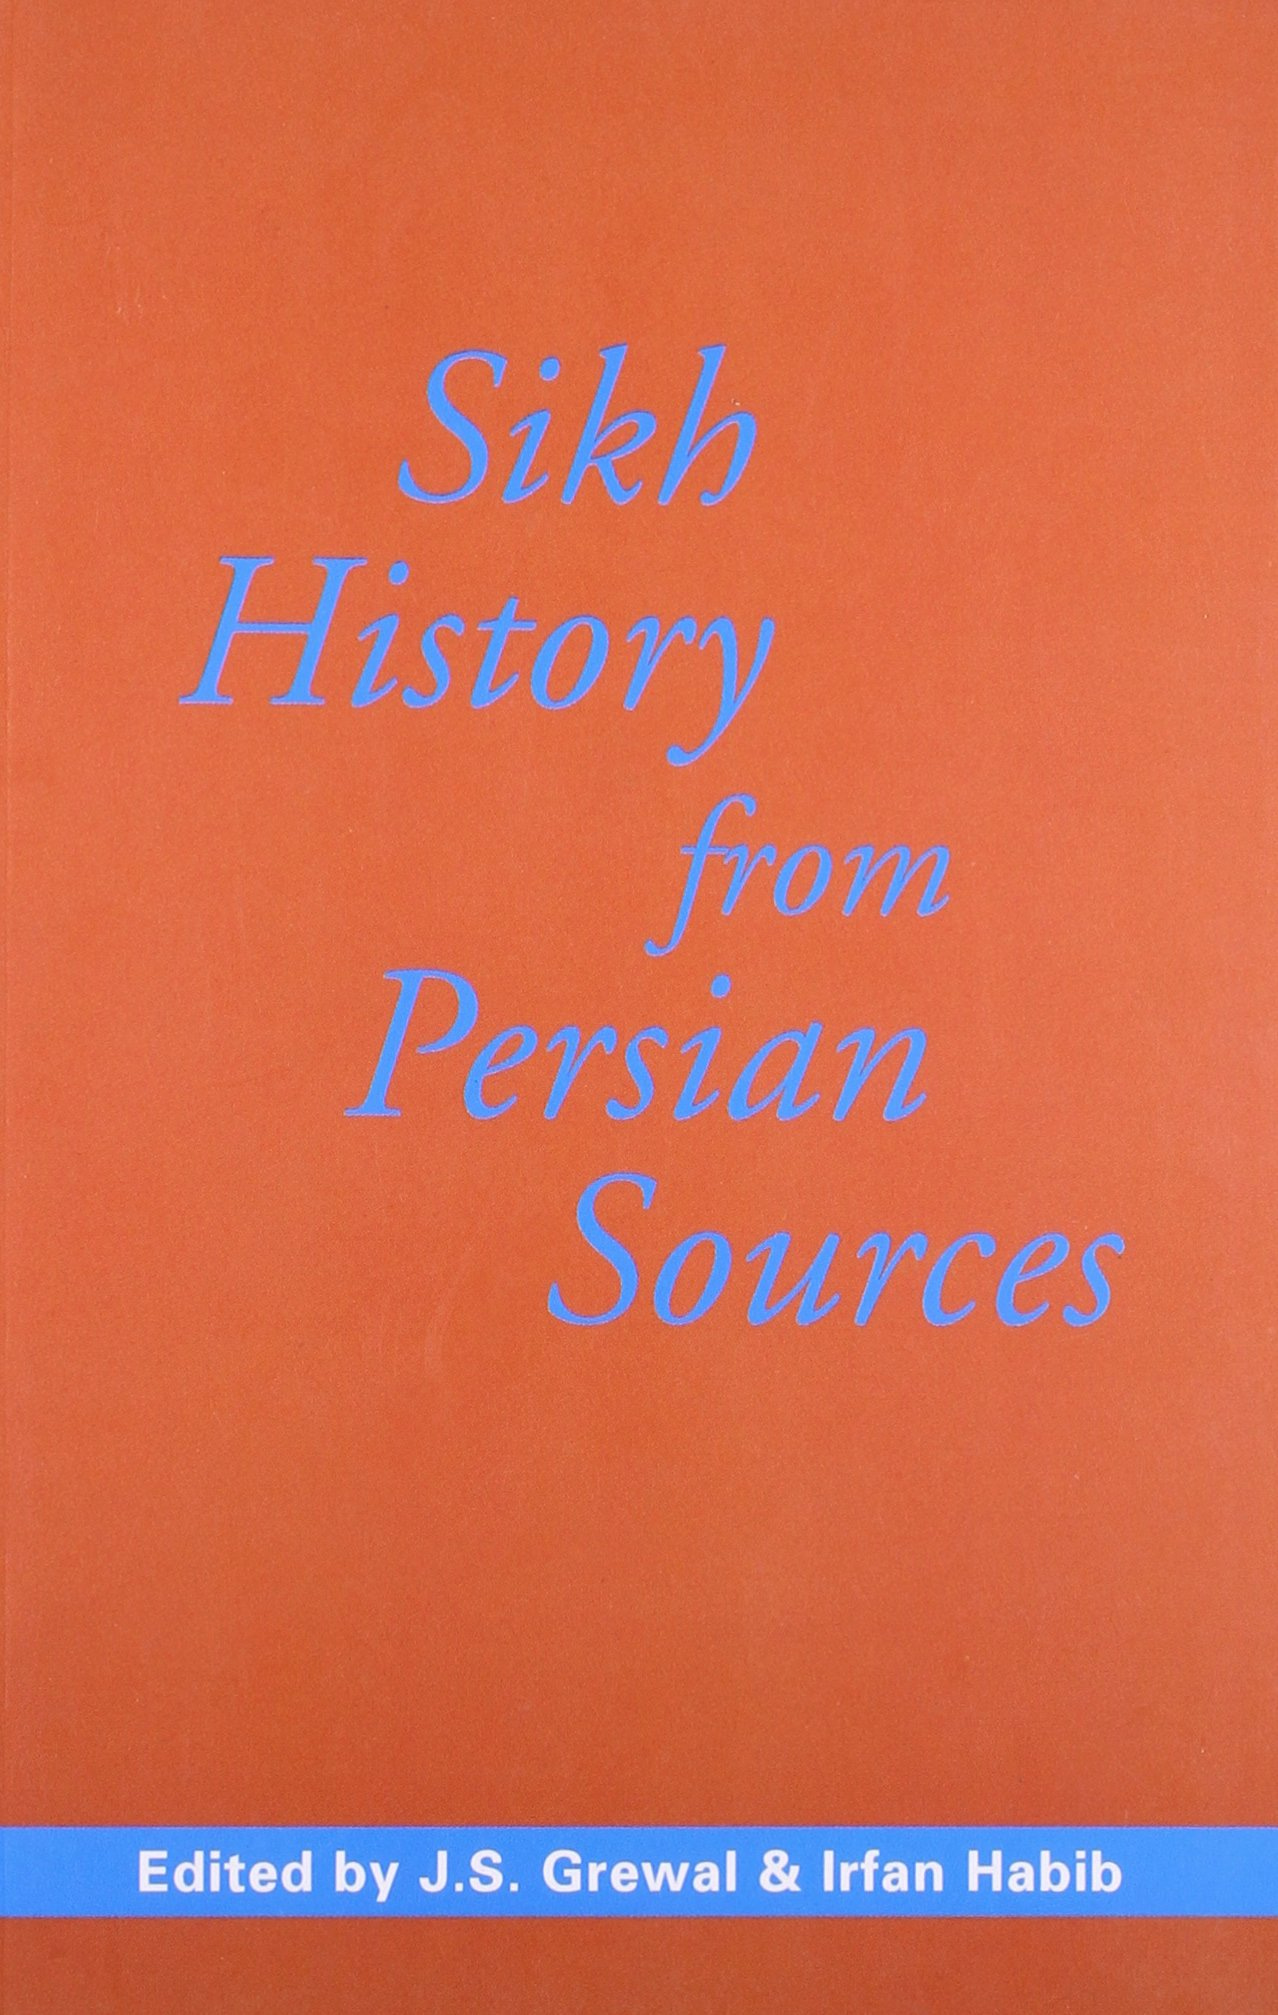 Sikh History From Persian Sources: Amazon.co.uk: by J.S. Grewal (Author):  9788189487898: Books